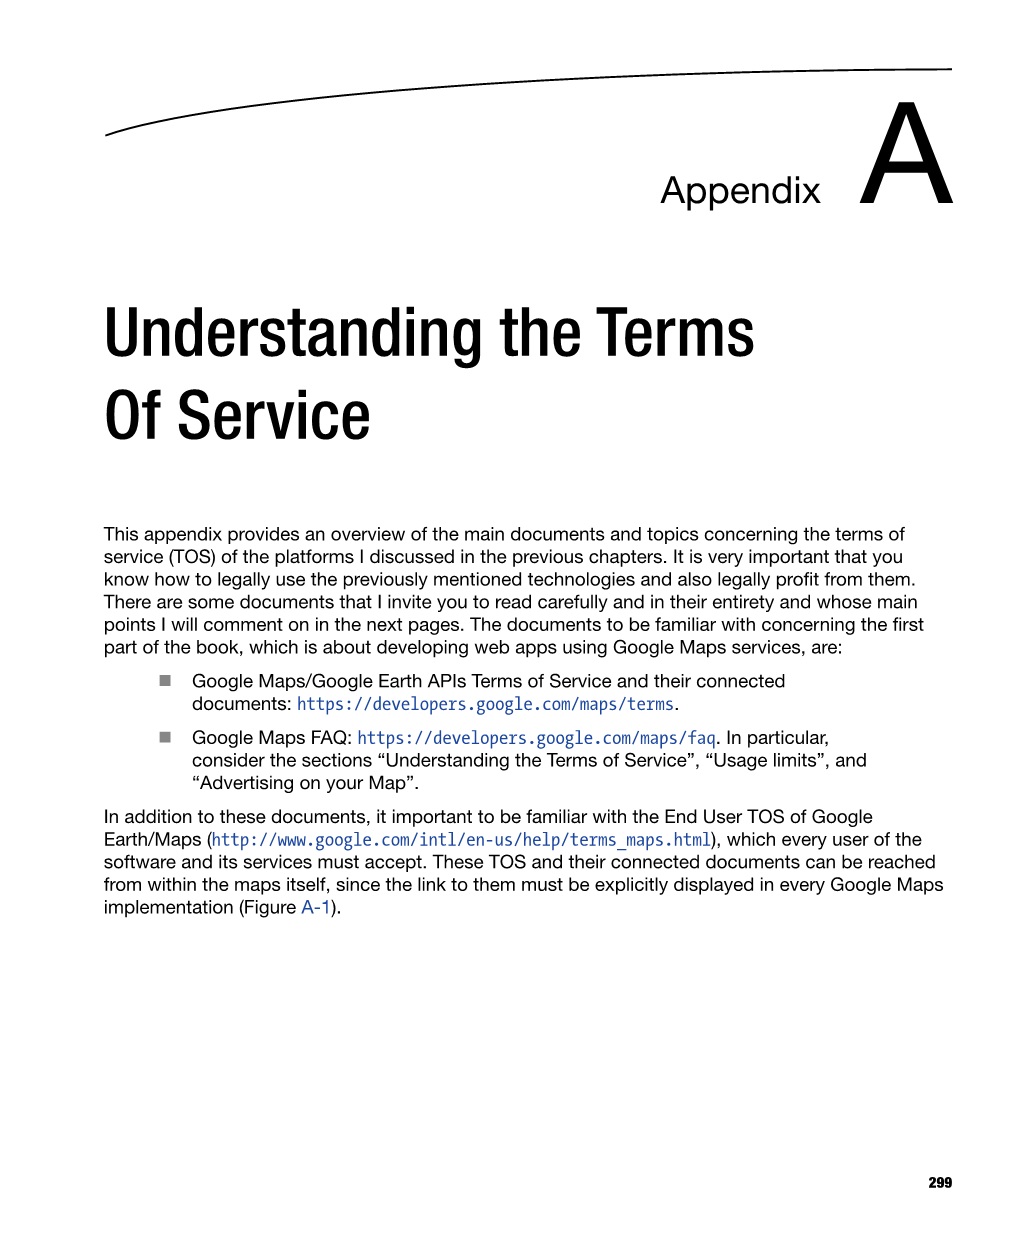 Understanding the Terms of Service